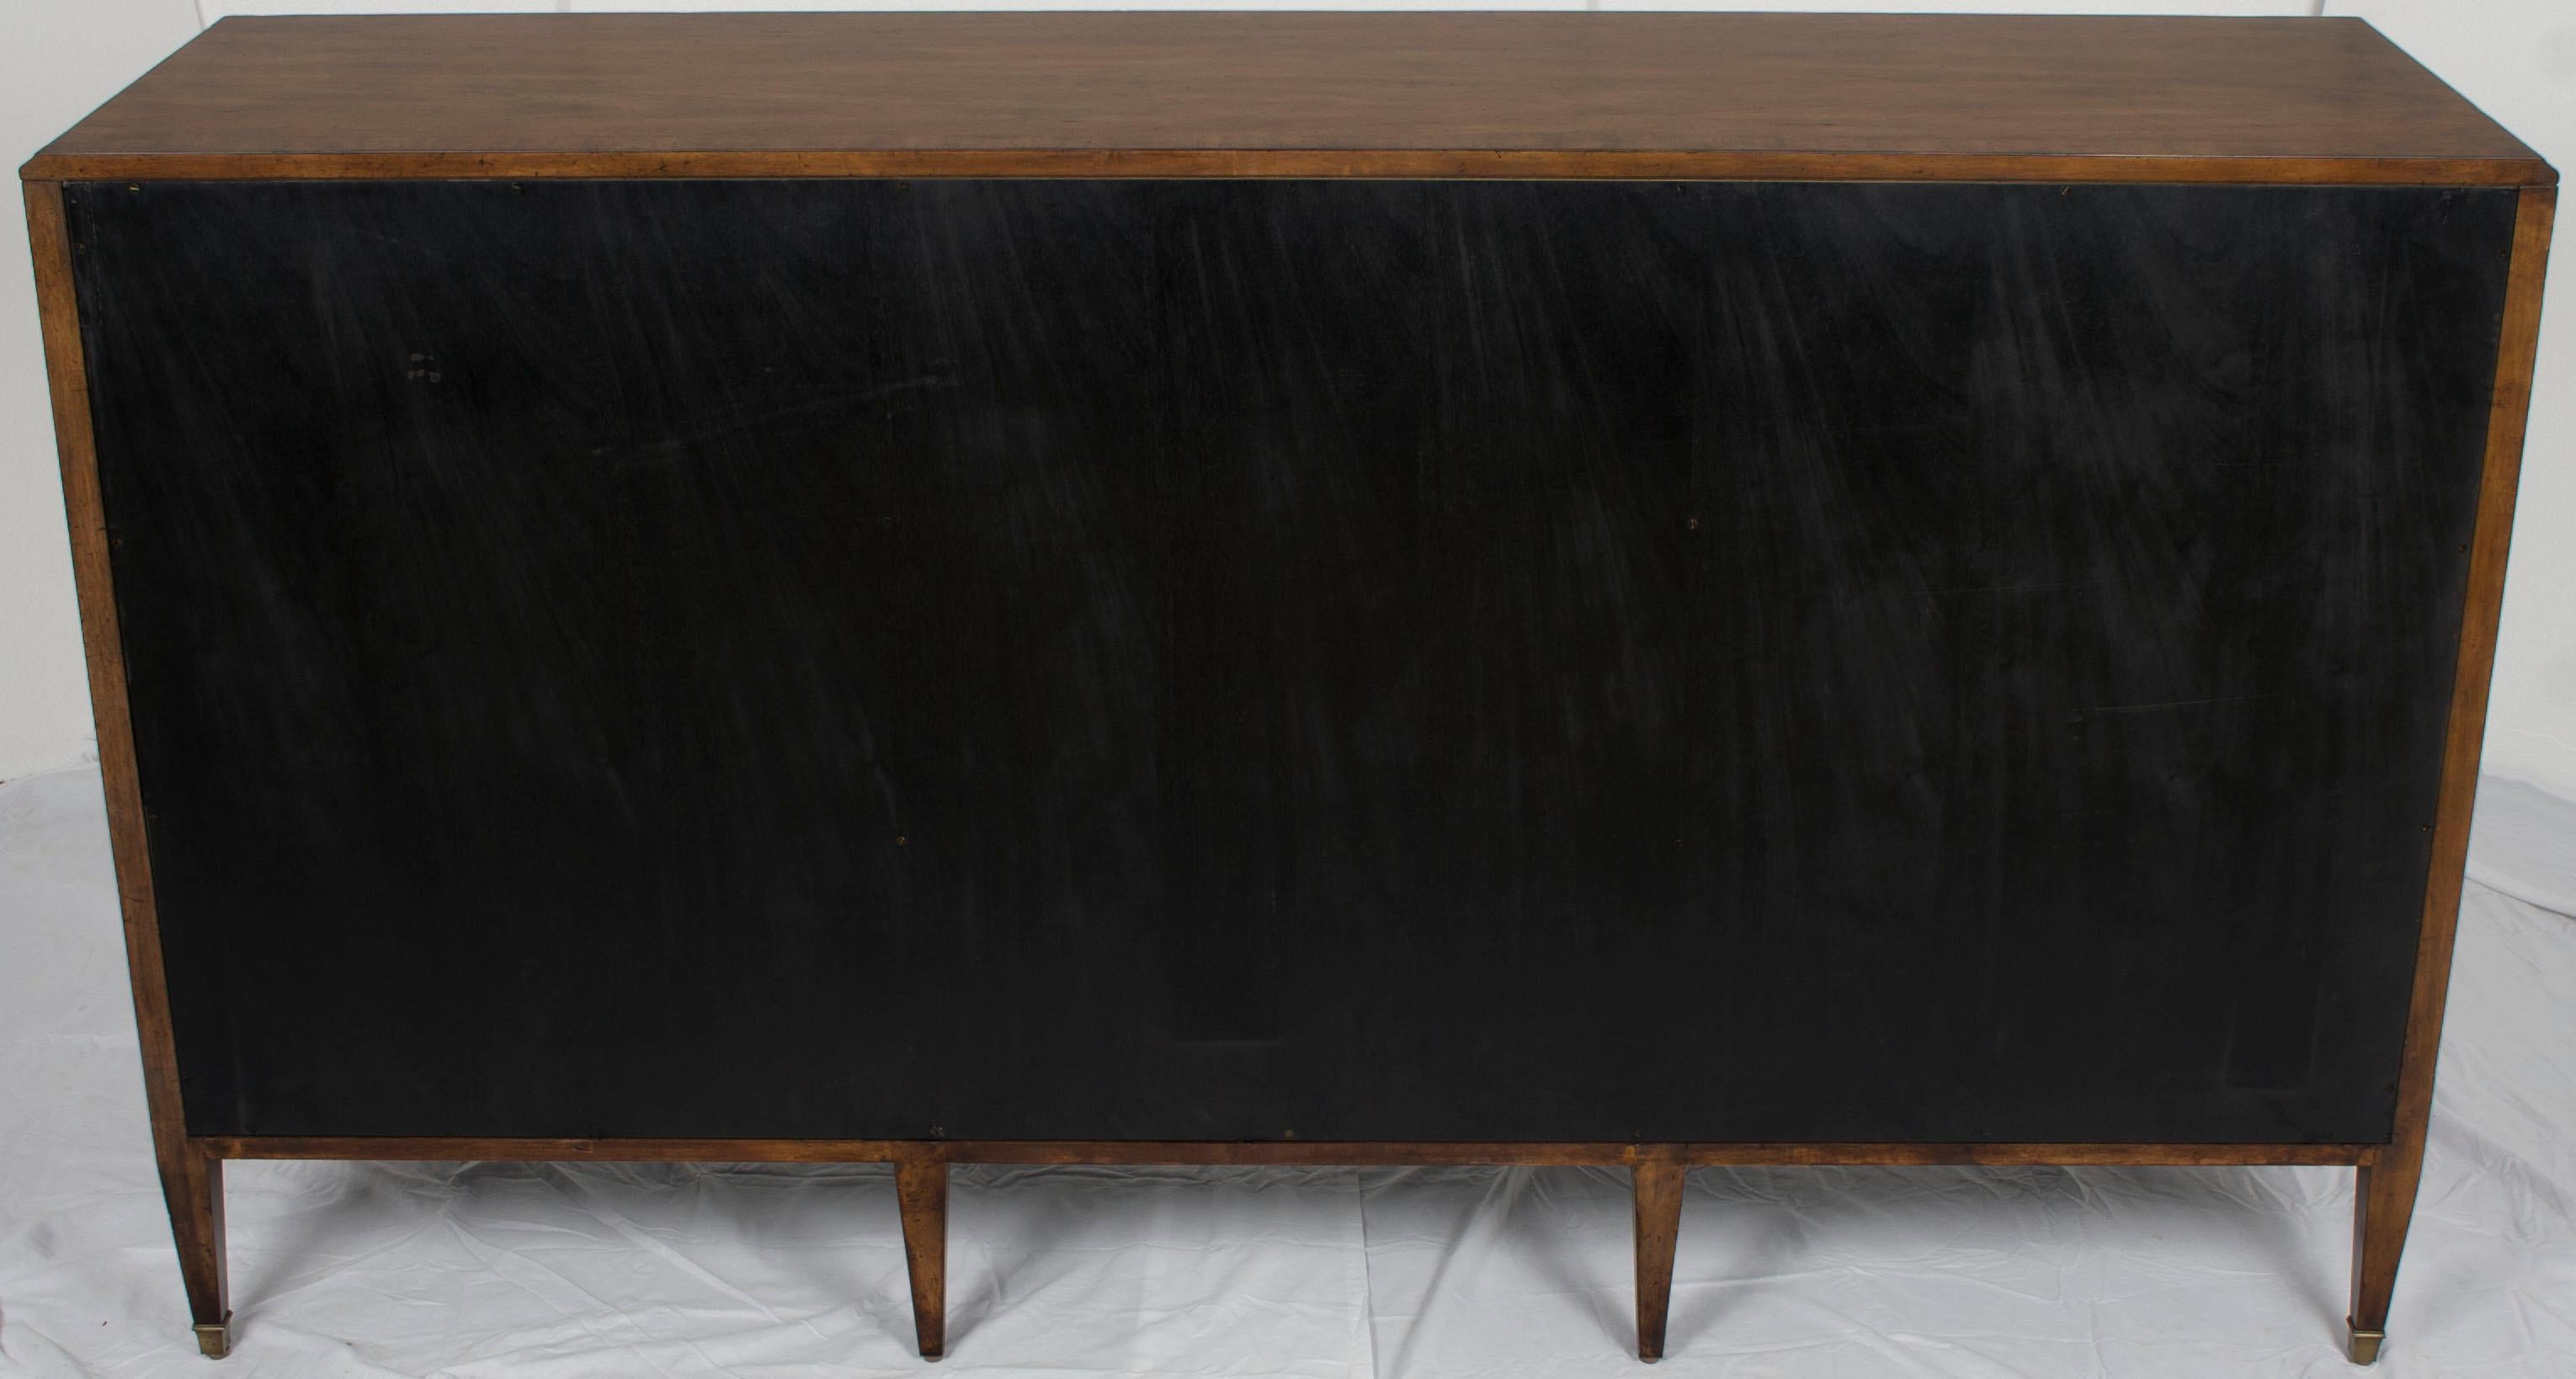 Light Mahogany Distressed Buffet Credenza Sideboard with Antiqued Mirrors 4